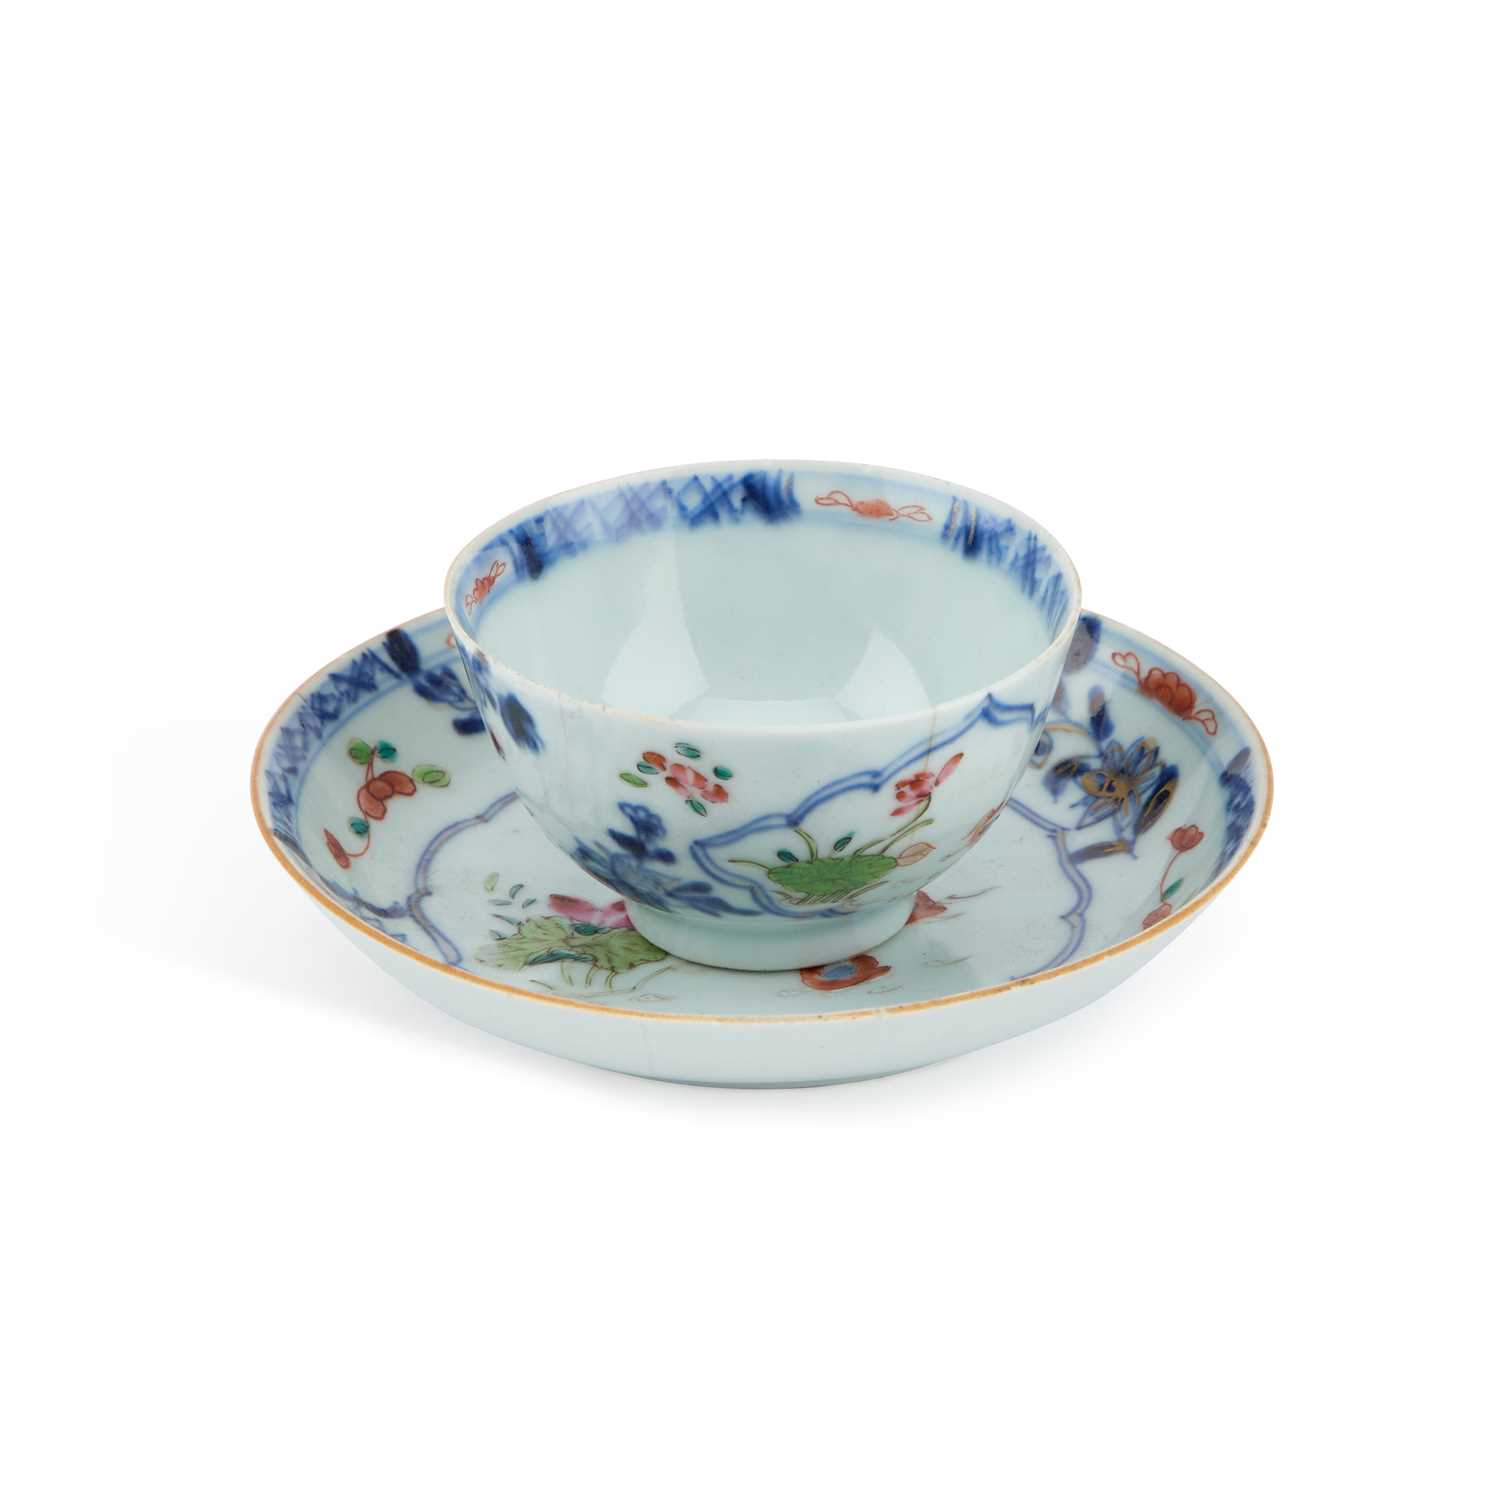 AN 18TH CENTURY CHINESE FAMILLE ROSE TEA BOWL - Image 3 of 4